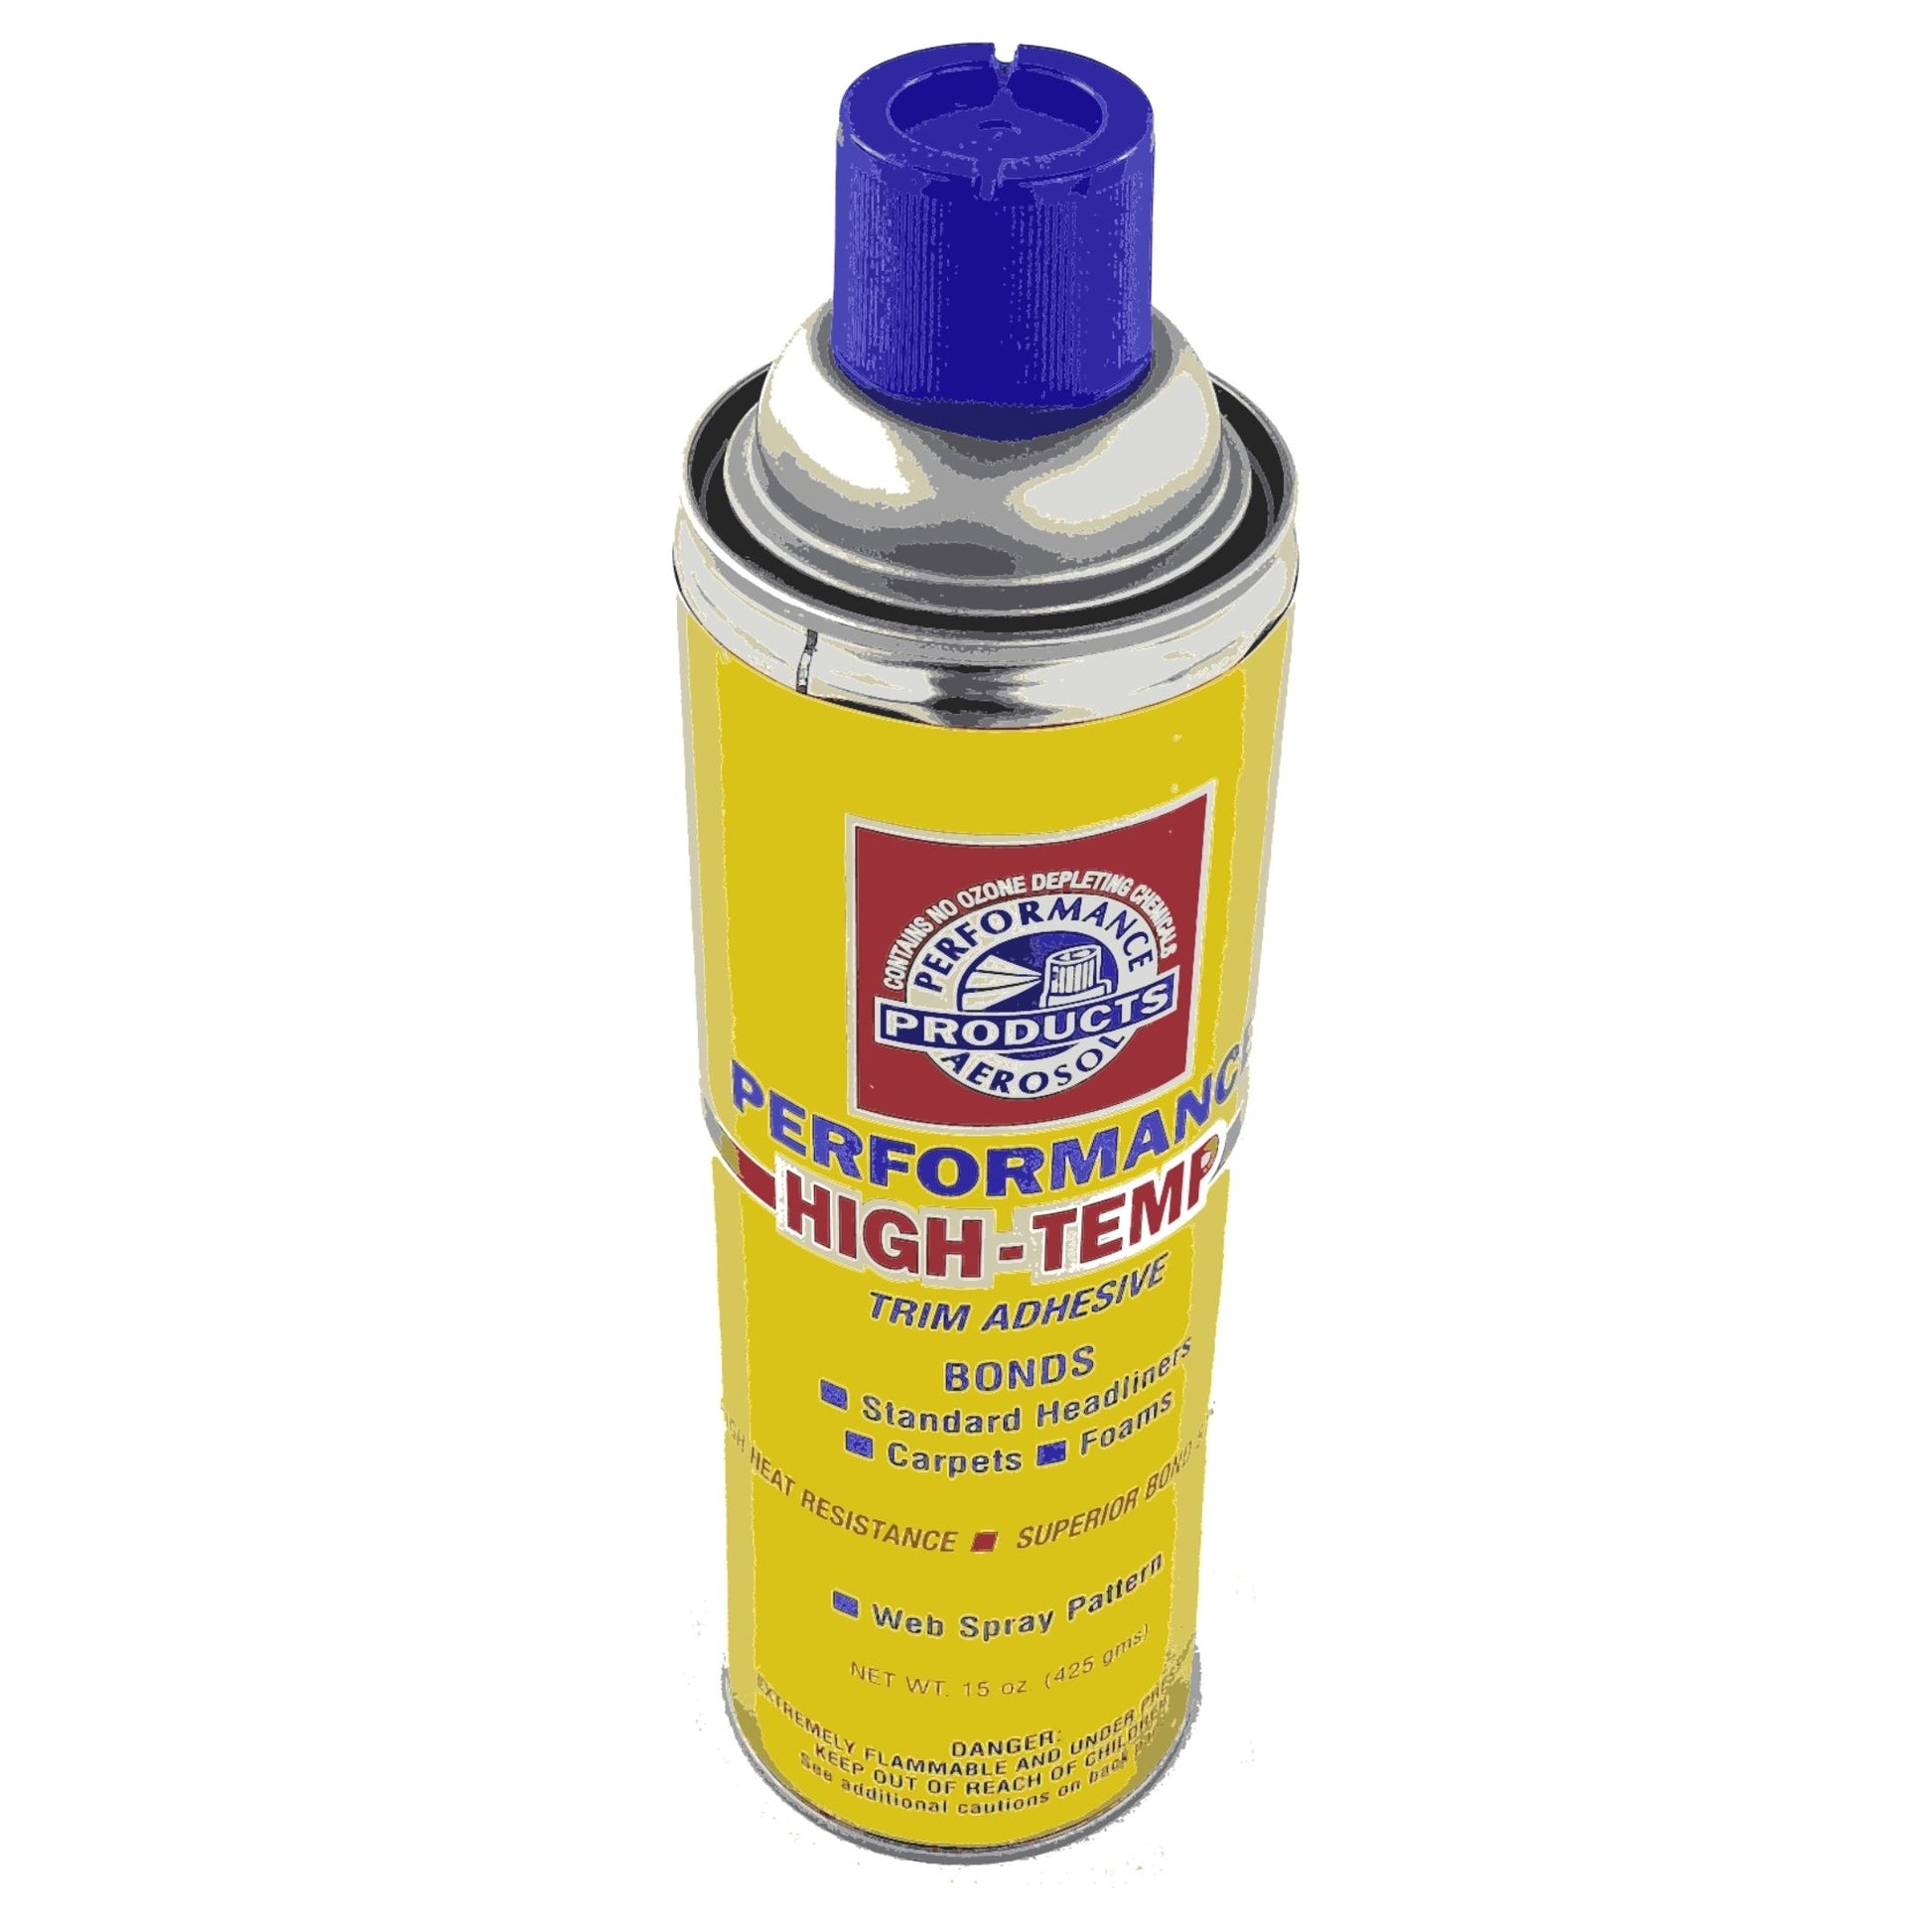 Upholstery HIGH Temperature/Strength Web Spray Glue Contact Adhesive 13oz.  for Fabric, Foam, Acoustic Panels, Crafting & Automotive Headliner. Fabric